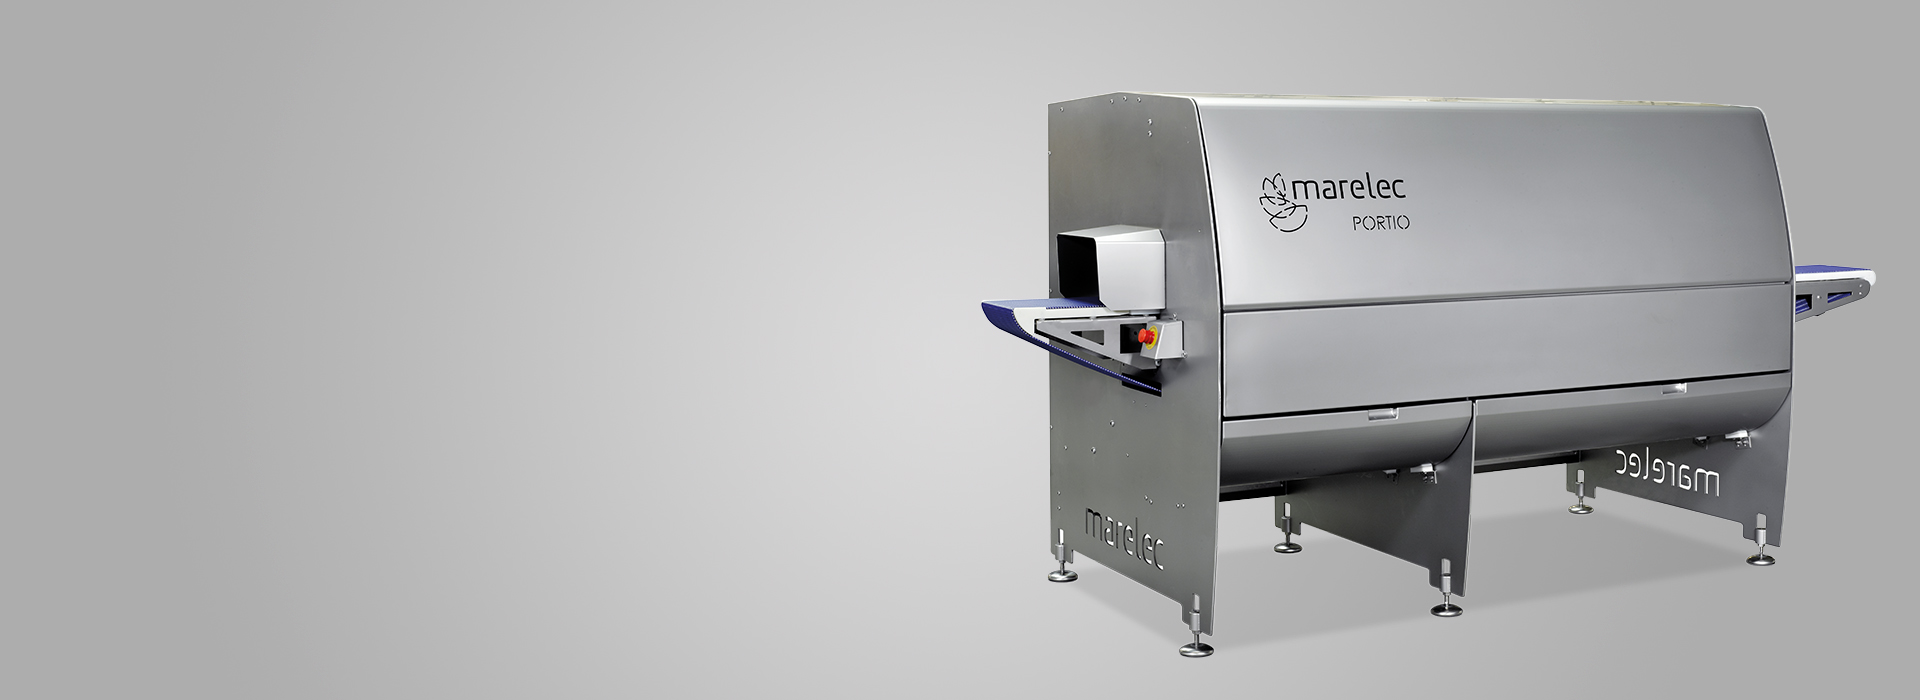 Intelligent cutting machine for fixed-weight portions of poultry products such as large poultry fillets for turkey fillets.